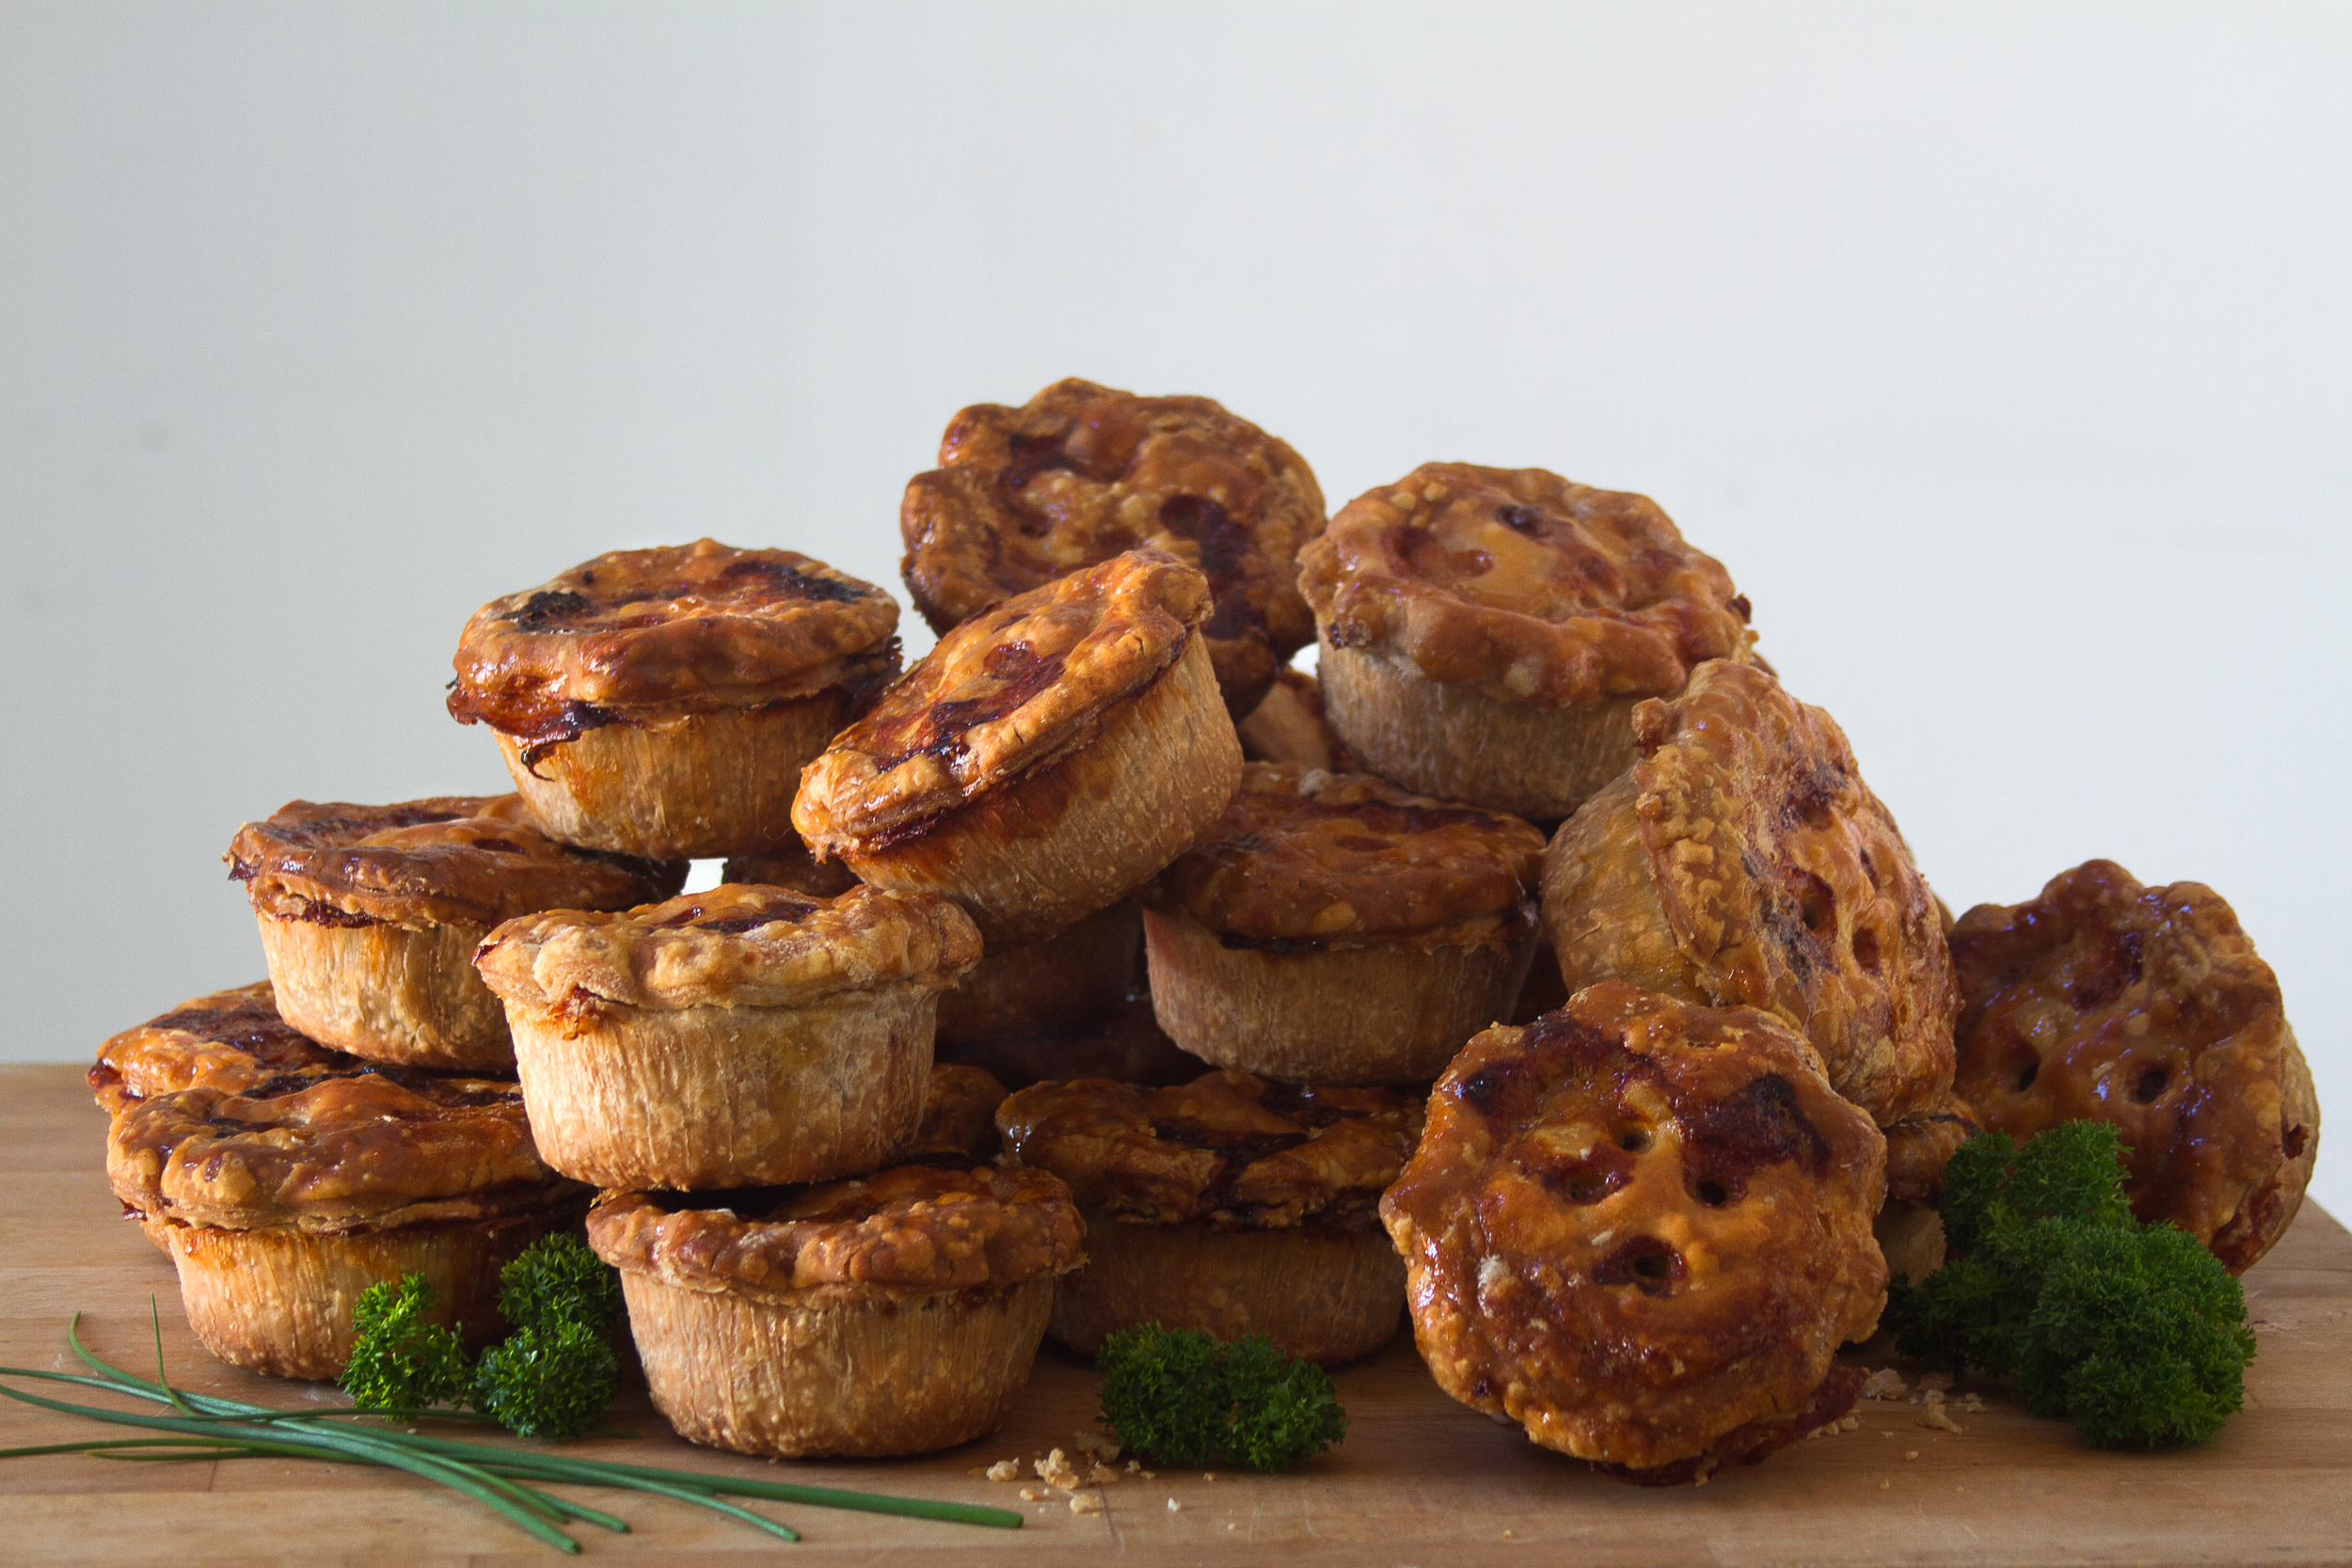 A stack of hand made, luxury pork pies